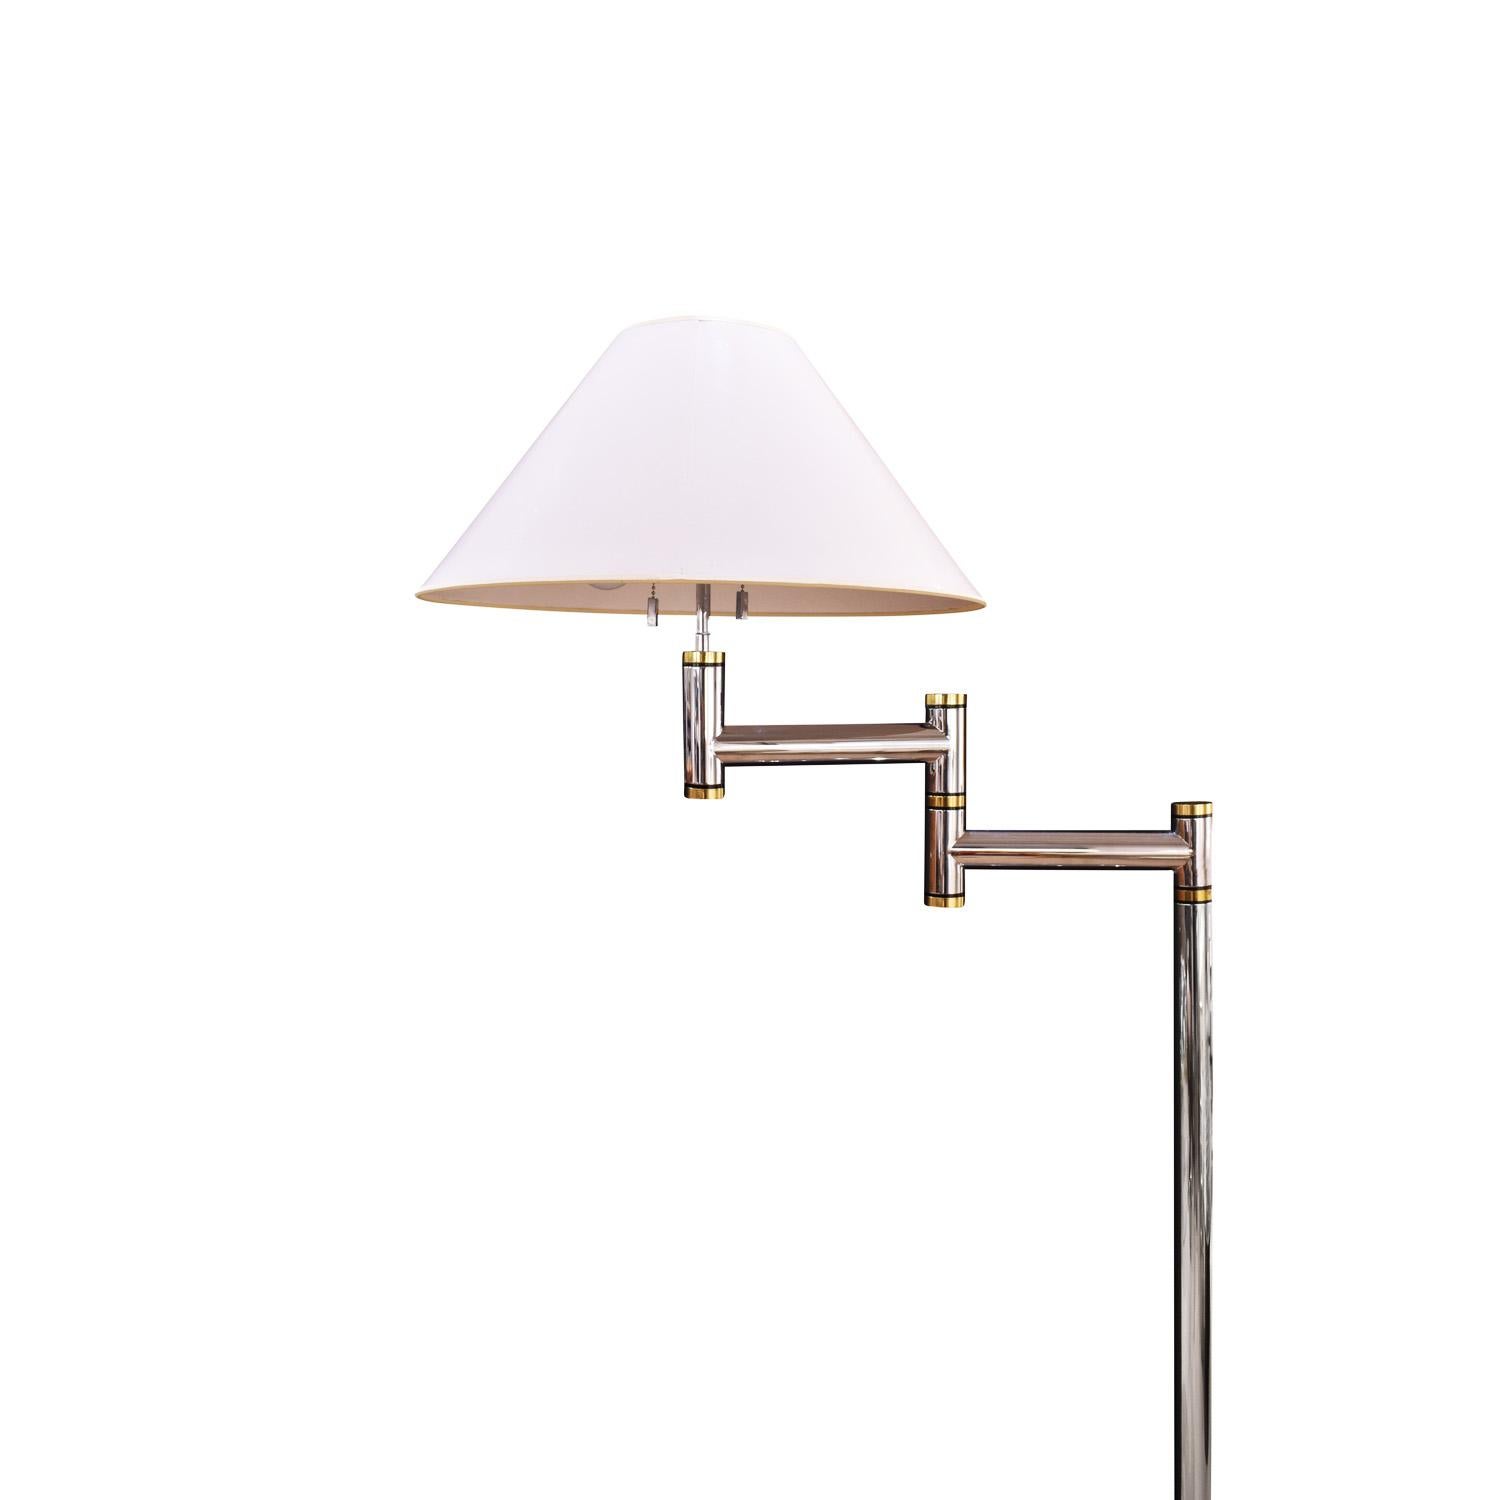 Meticulously crafted swing-arm floor lamp in polished chrome and brass by Karl Springer, American 1980's. The quality of construction of this lamp is incredible. With original white lacquered shade.


DM: 12 inches at base
H: 58 inches
Arm